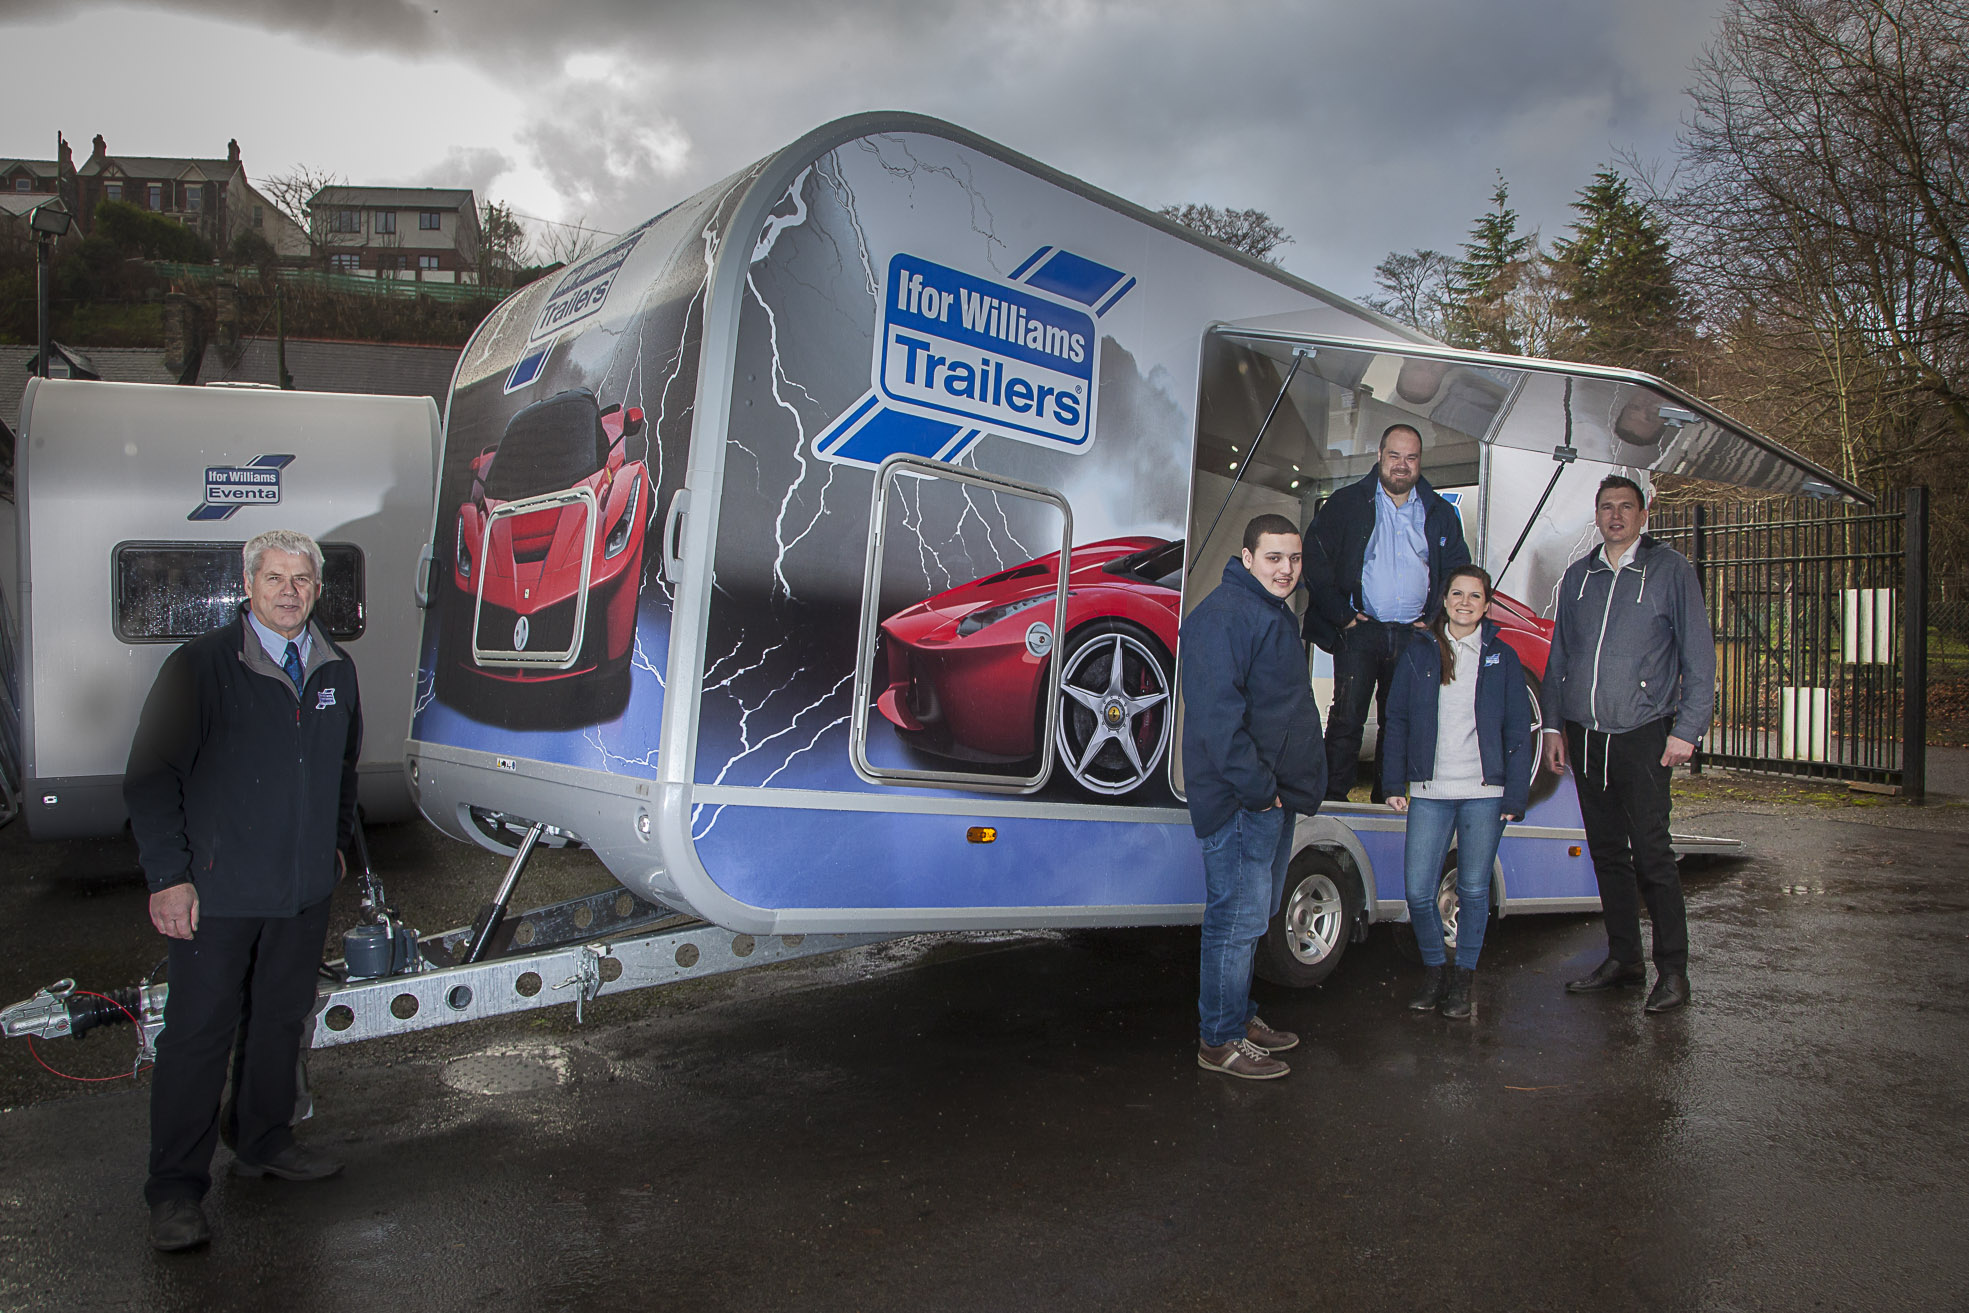 New car transporter puts trailer firm on road to more success